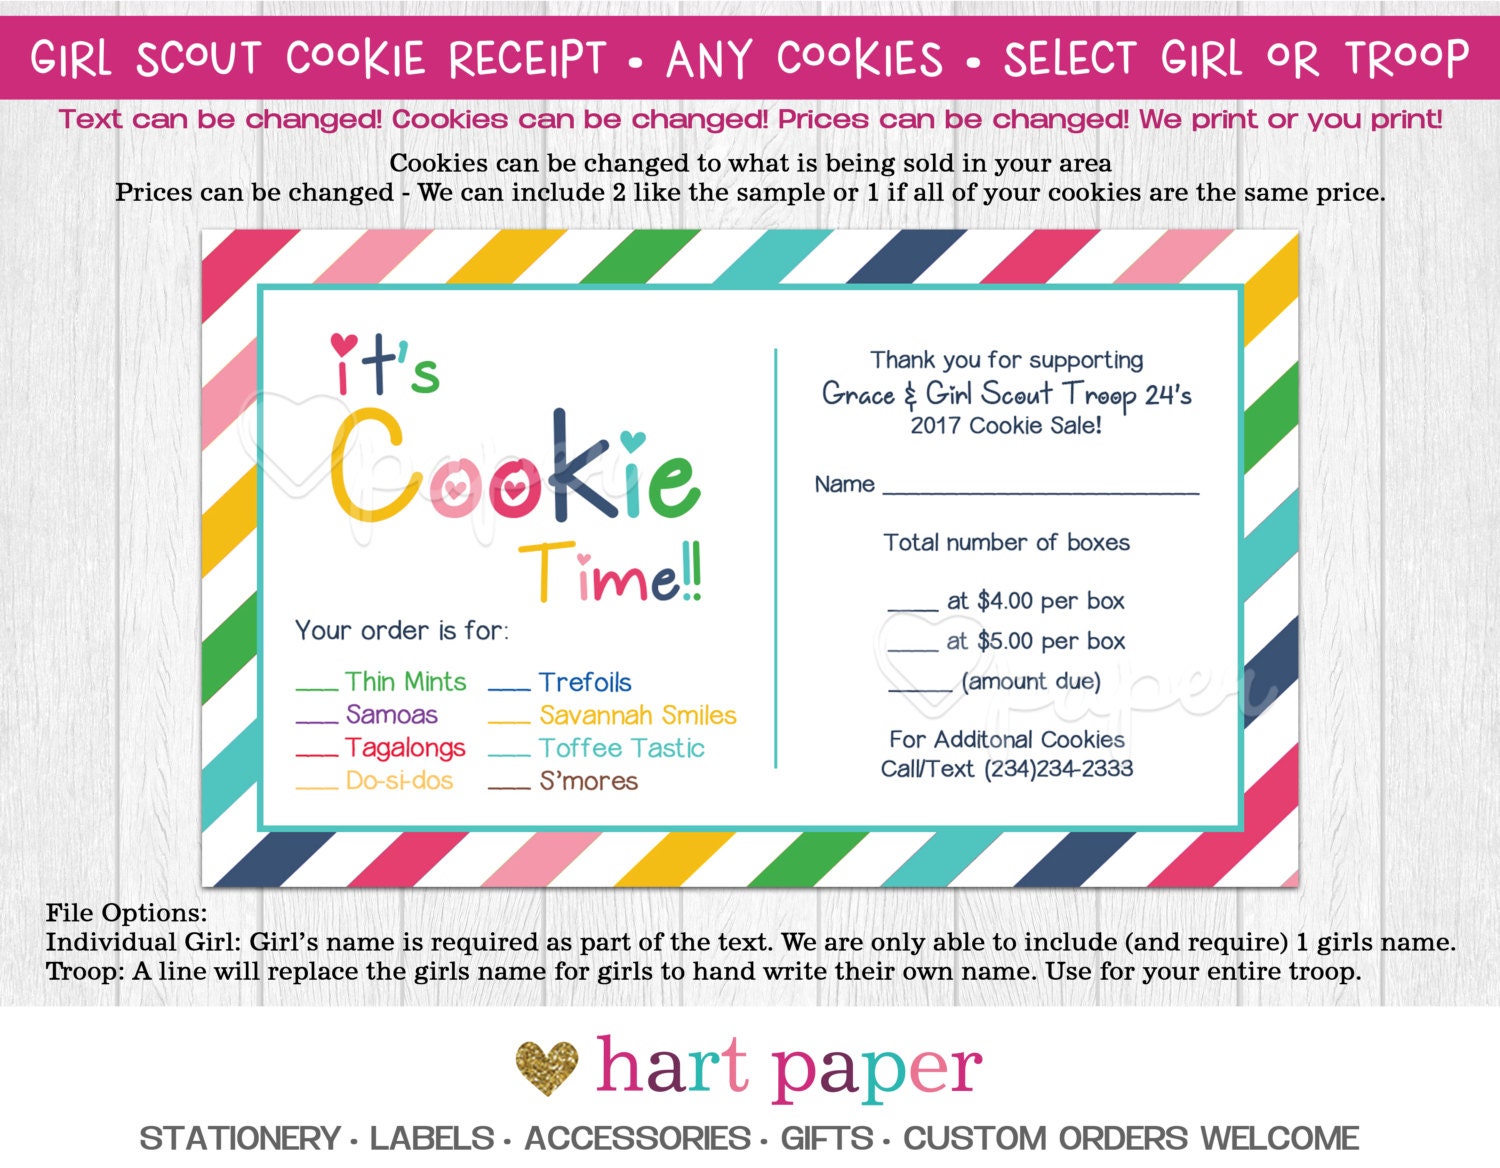 girl-scout-troop-cookie-order-receipt-thank-you-card-rainbow